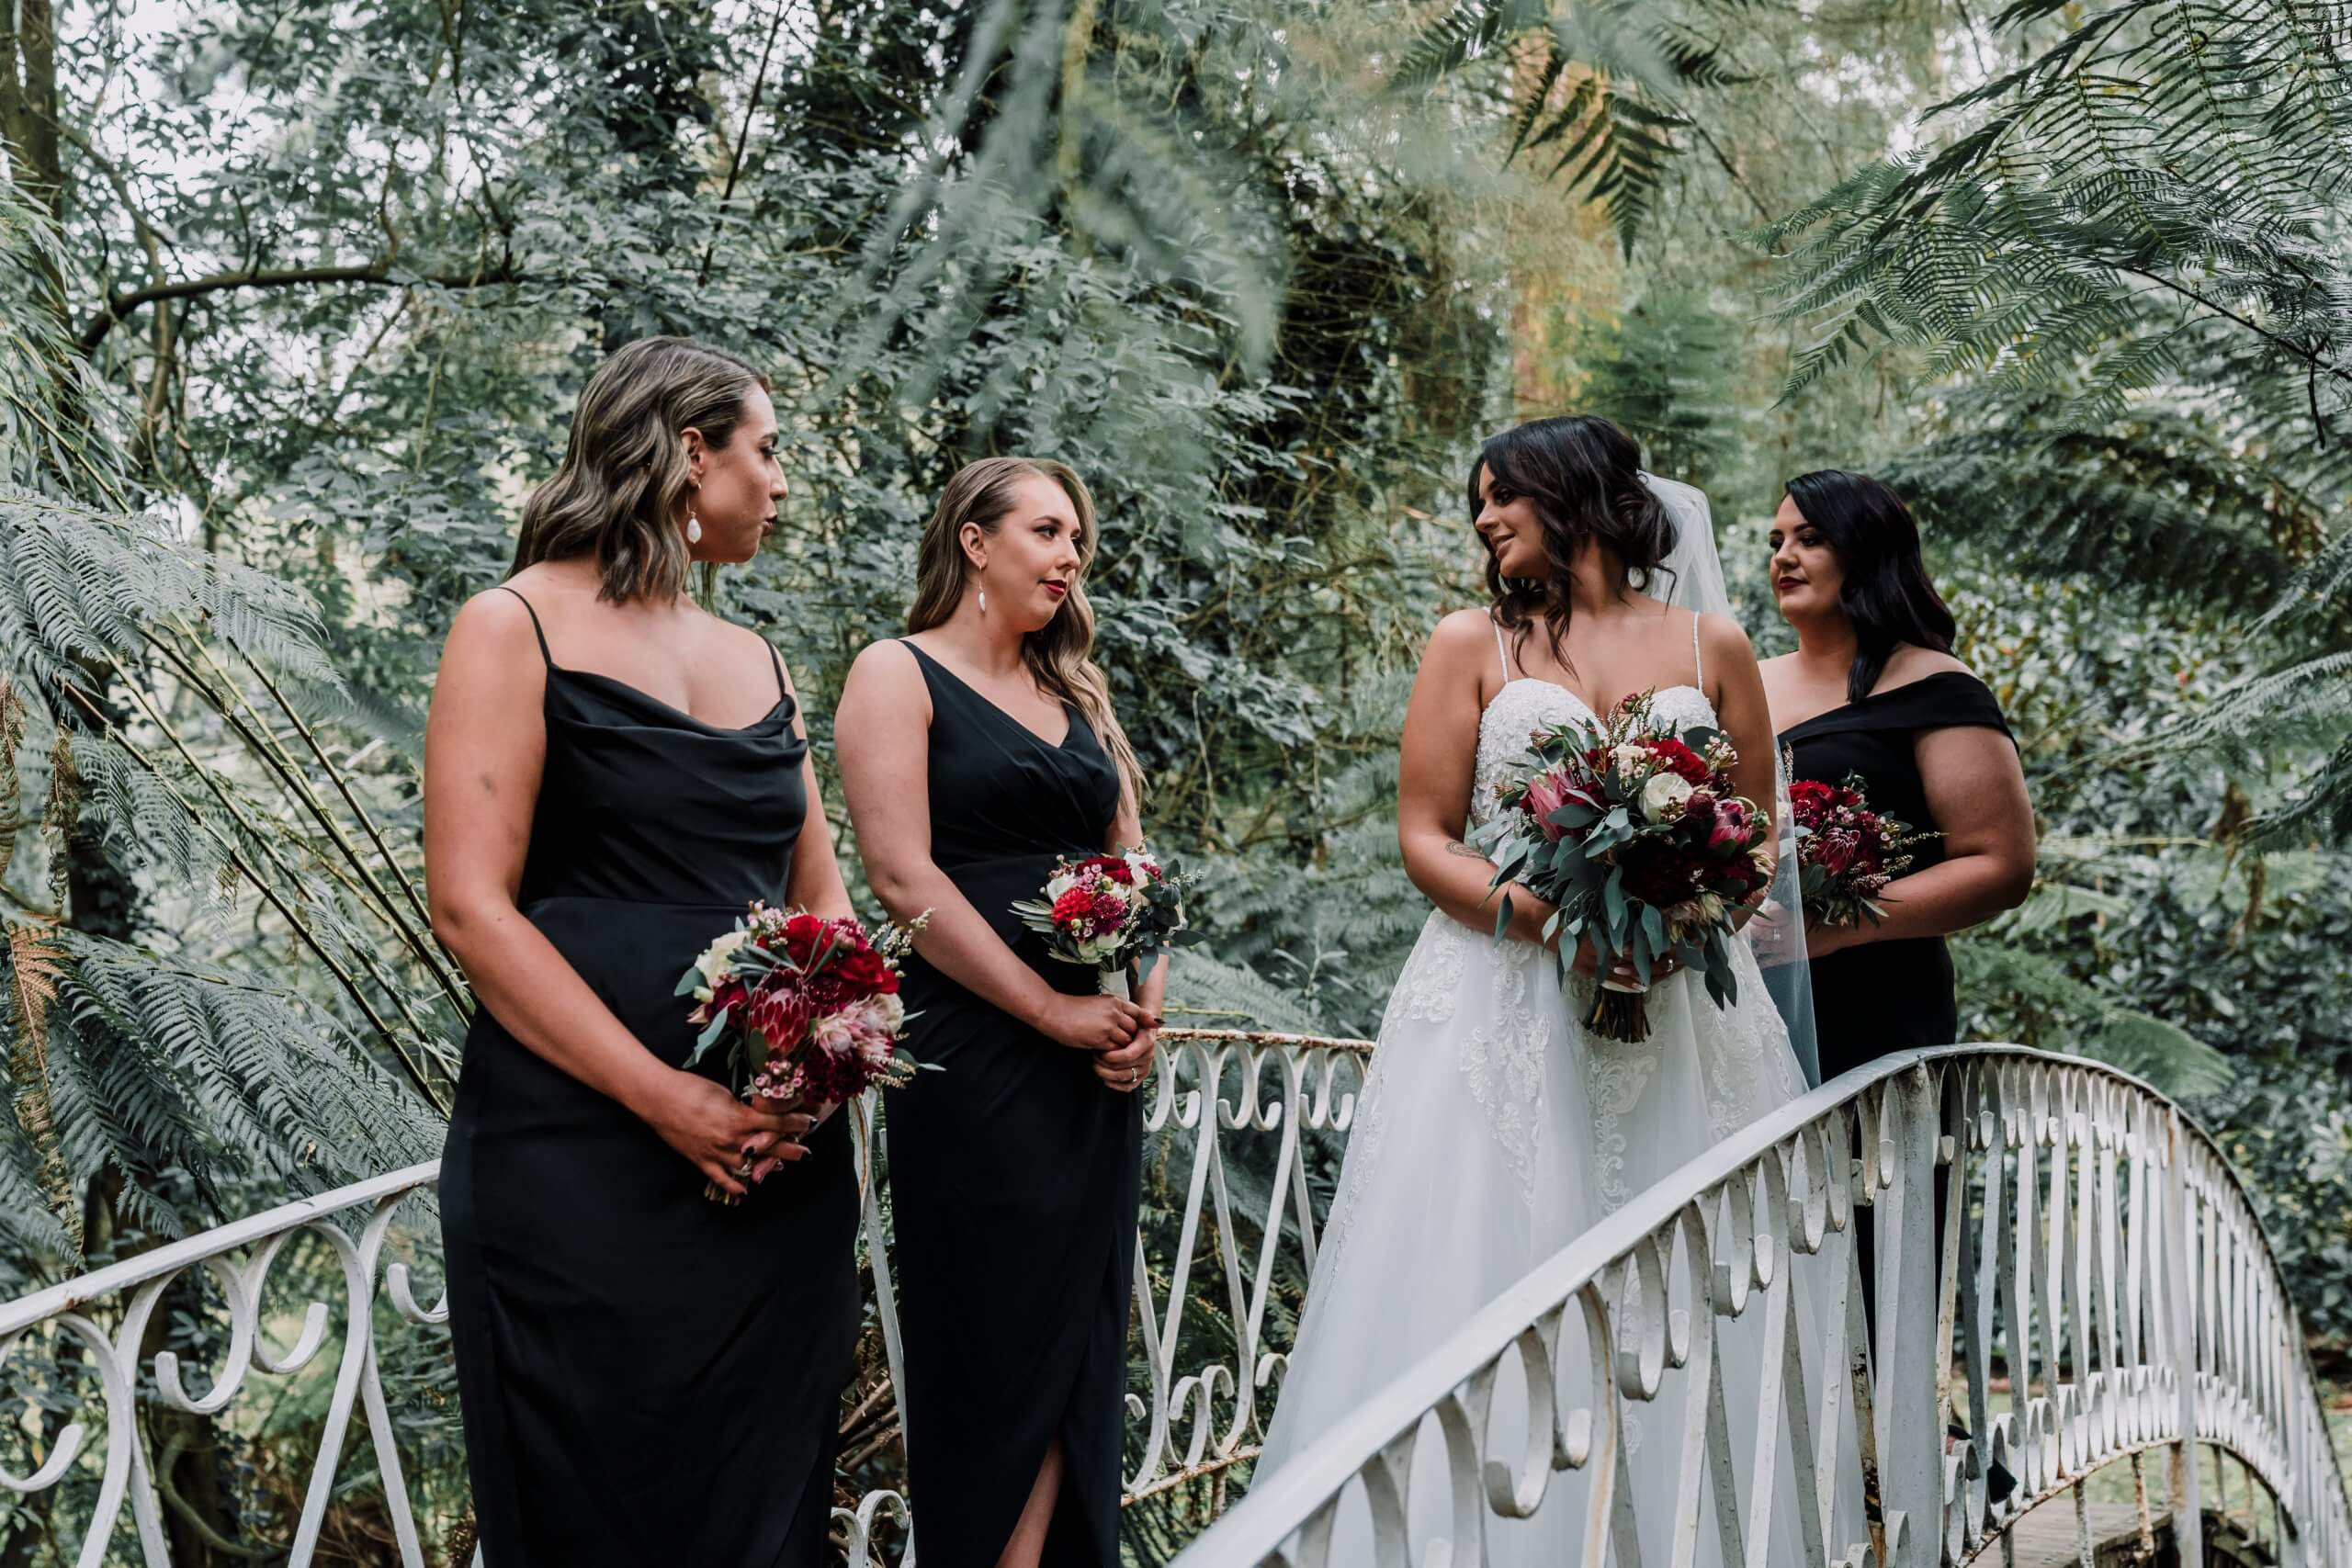 The bride looks stunning in her wedding dress and holding her bouquet of vibrant red flowers. Her three bridesmaids - clad in black dresses is photographed standing atop a bridge.